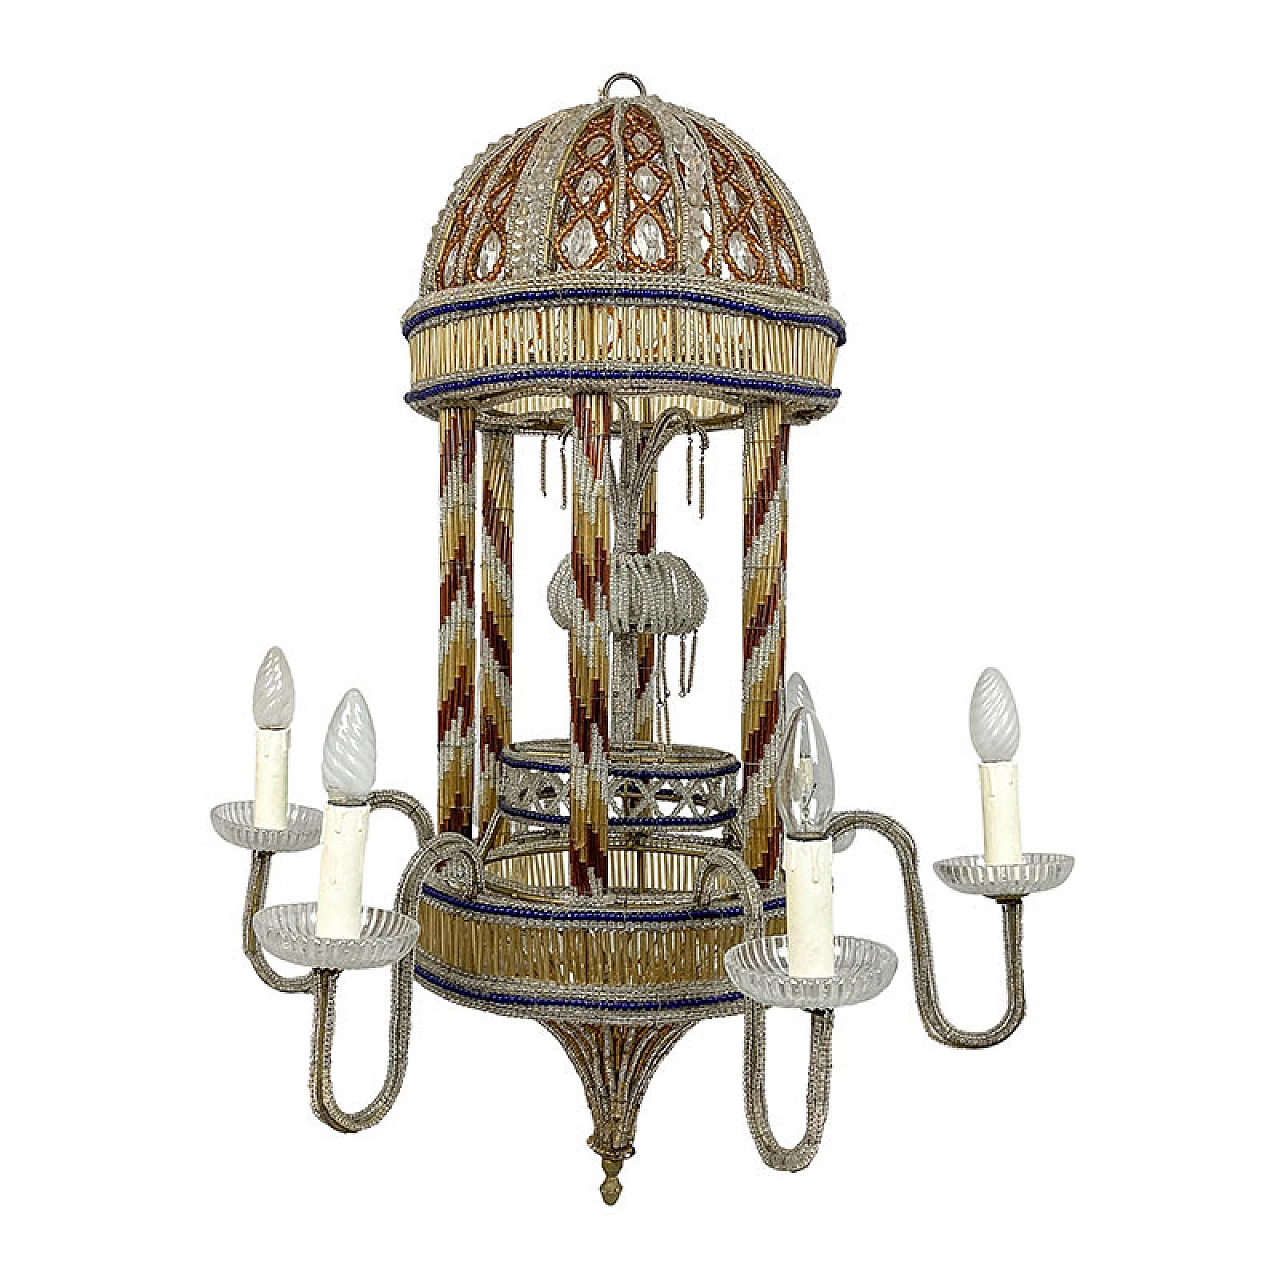 Pavilion-shaped ceiling lamp in Murano glass and metal, 1940s 1